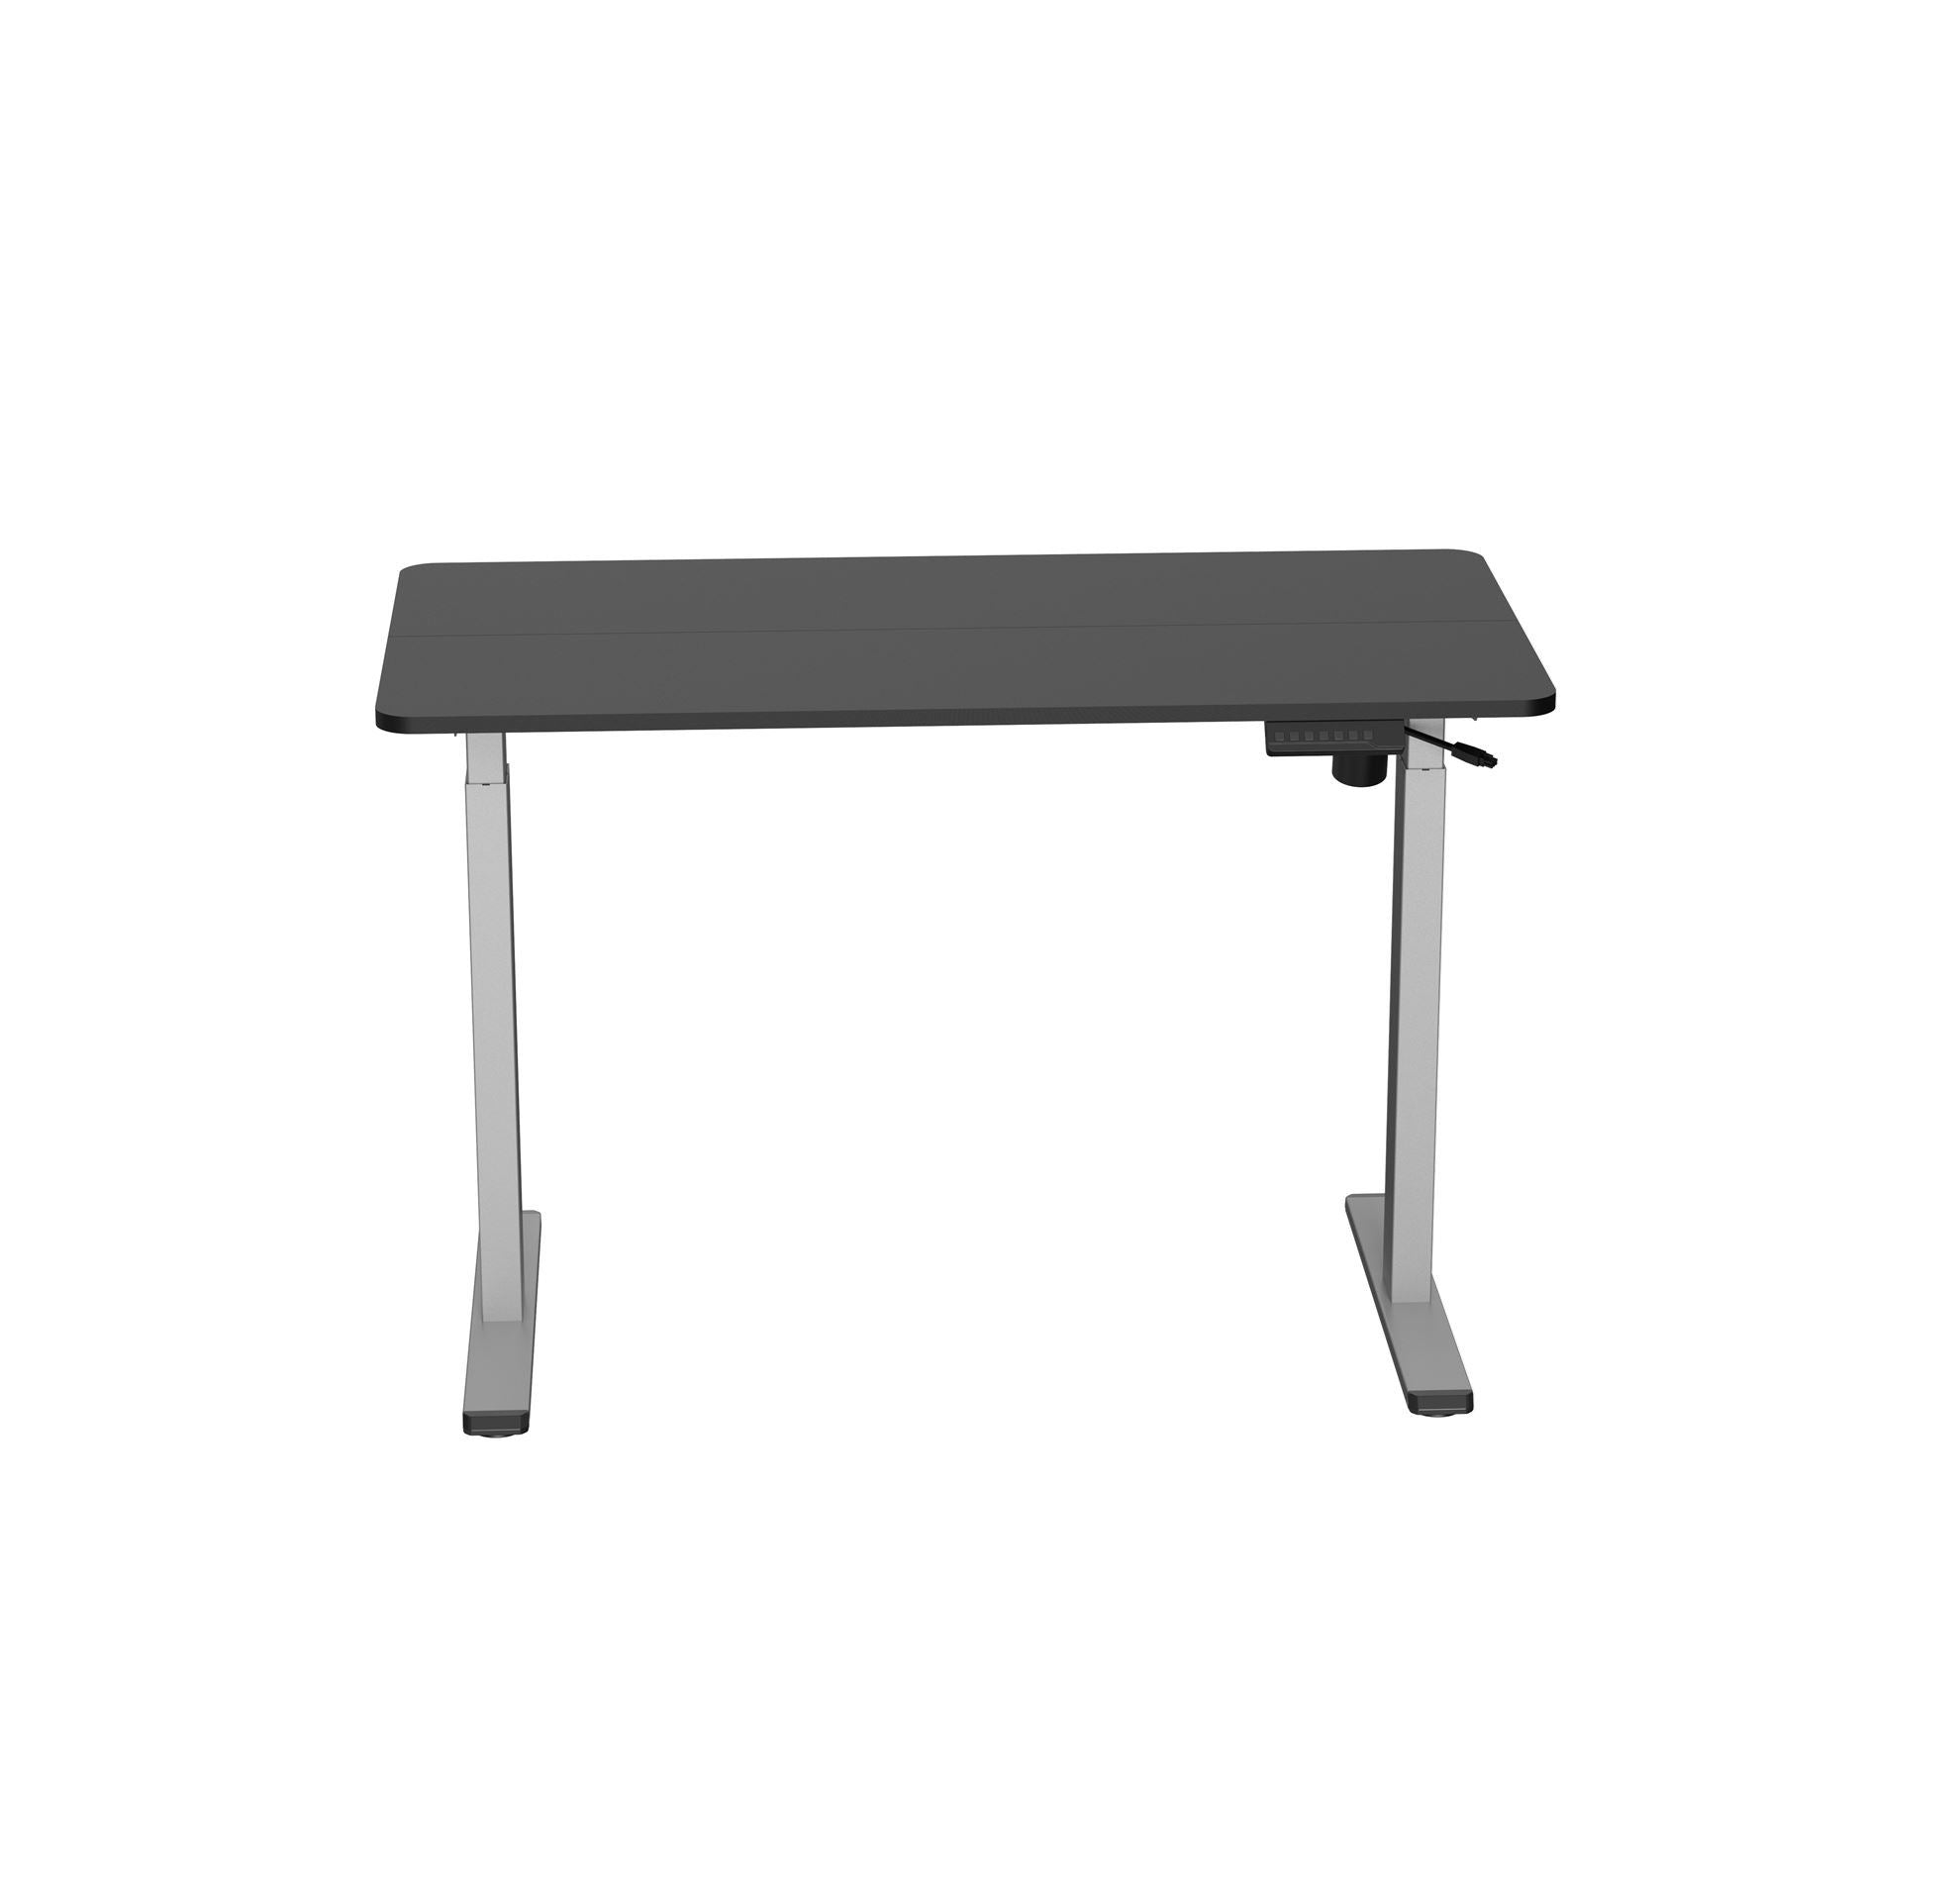 BRATECK_Compact_Single_Motor_Electric_Sit-Stand_Desk_with_Desktop_Included._Width_1200x600mm,_Height_Range_730-1210mm,_Weight_Cap_70Kgs,_3_memory_Settings,_Timer_Reminder._Grey_Colour.